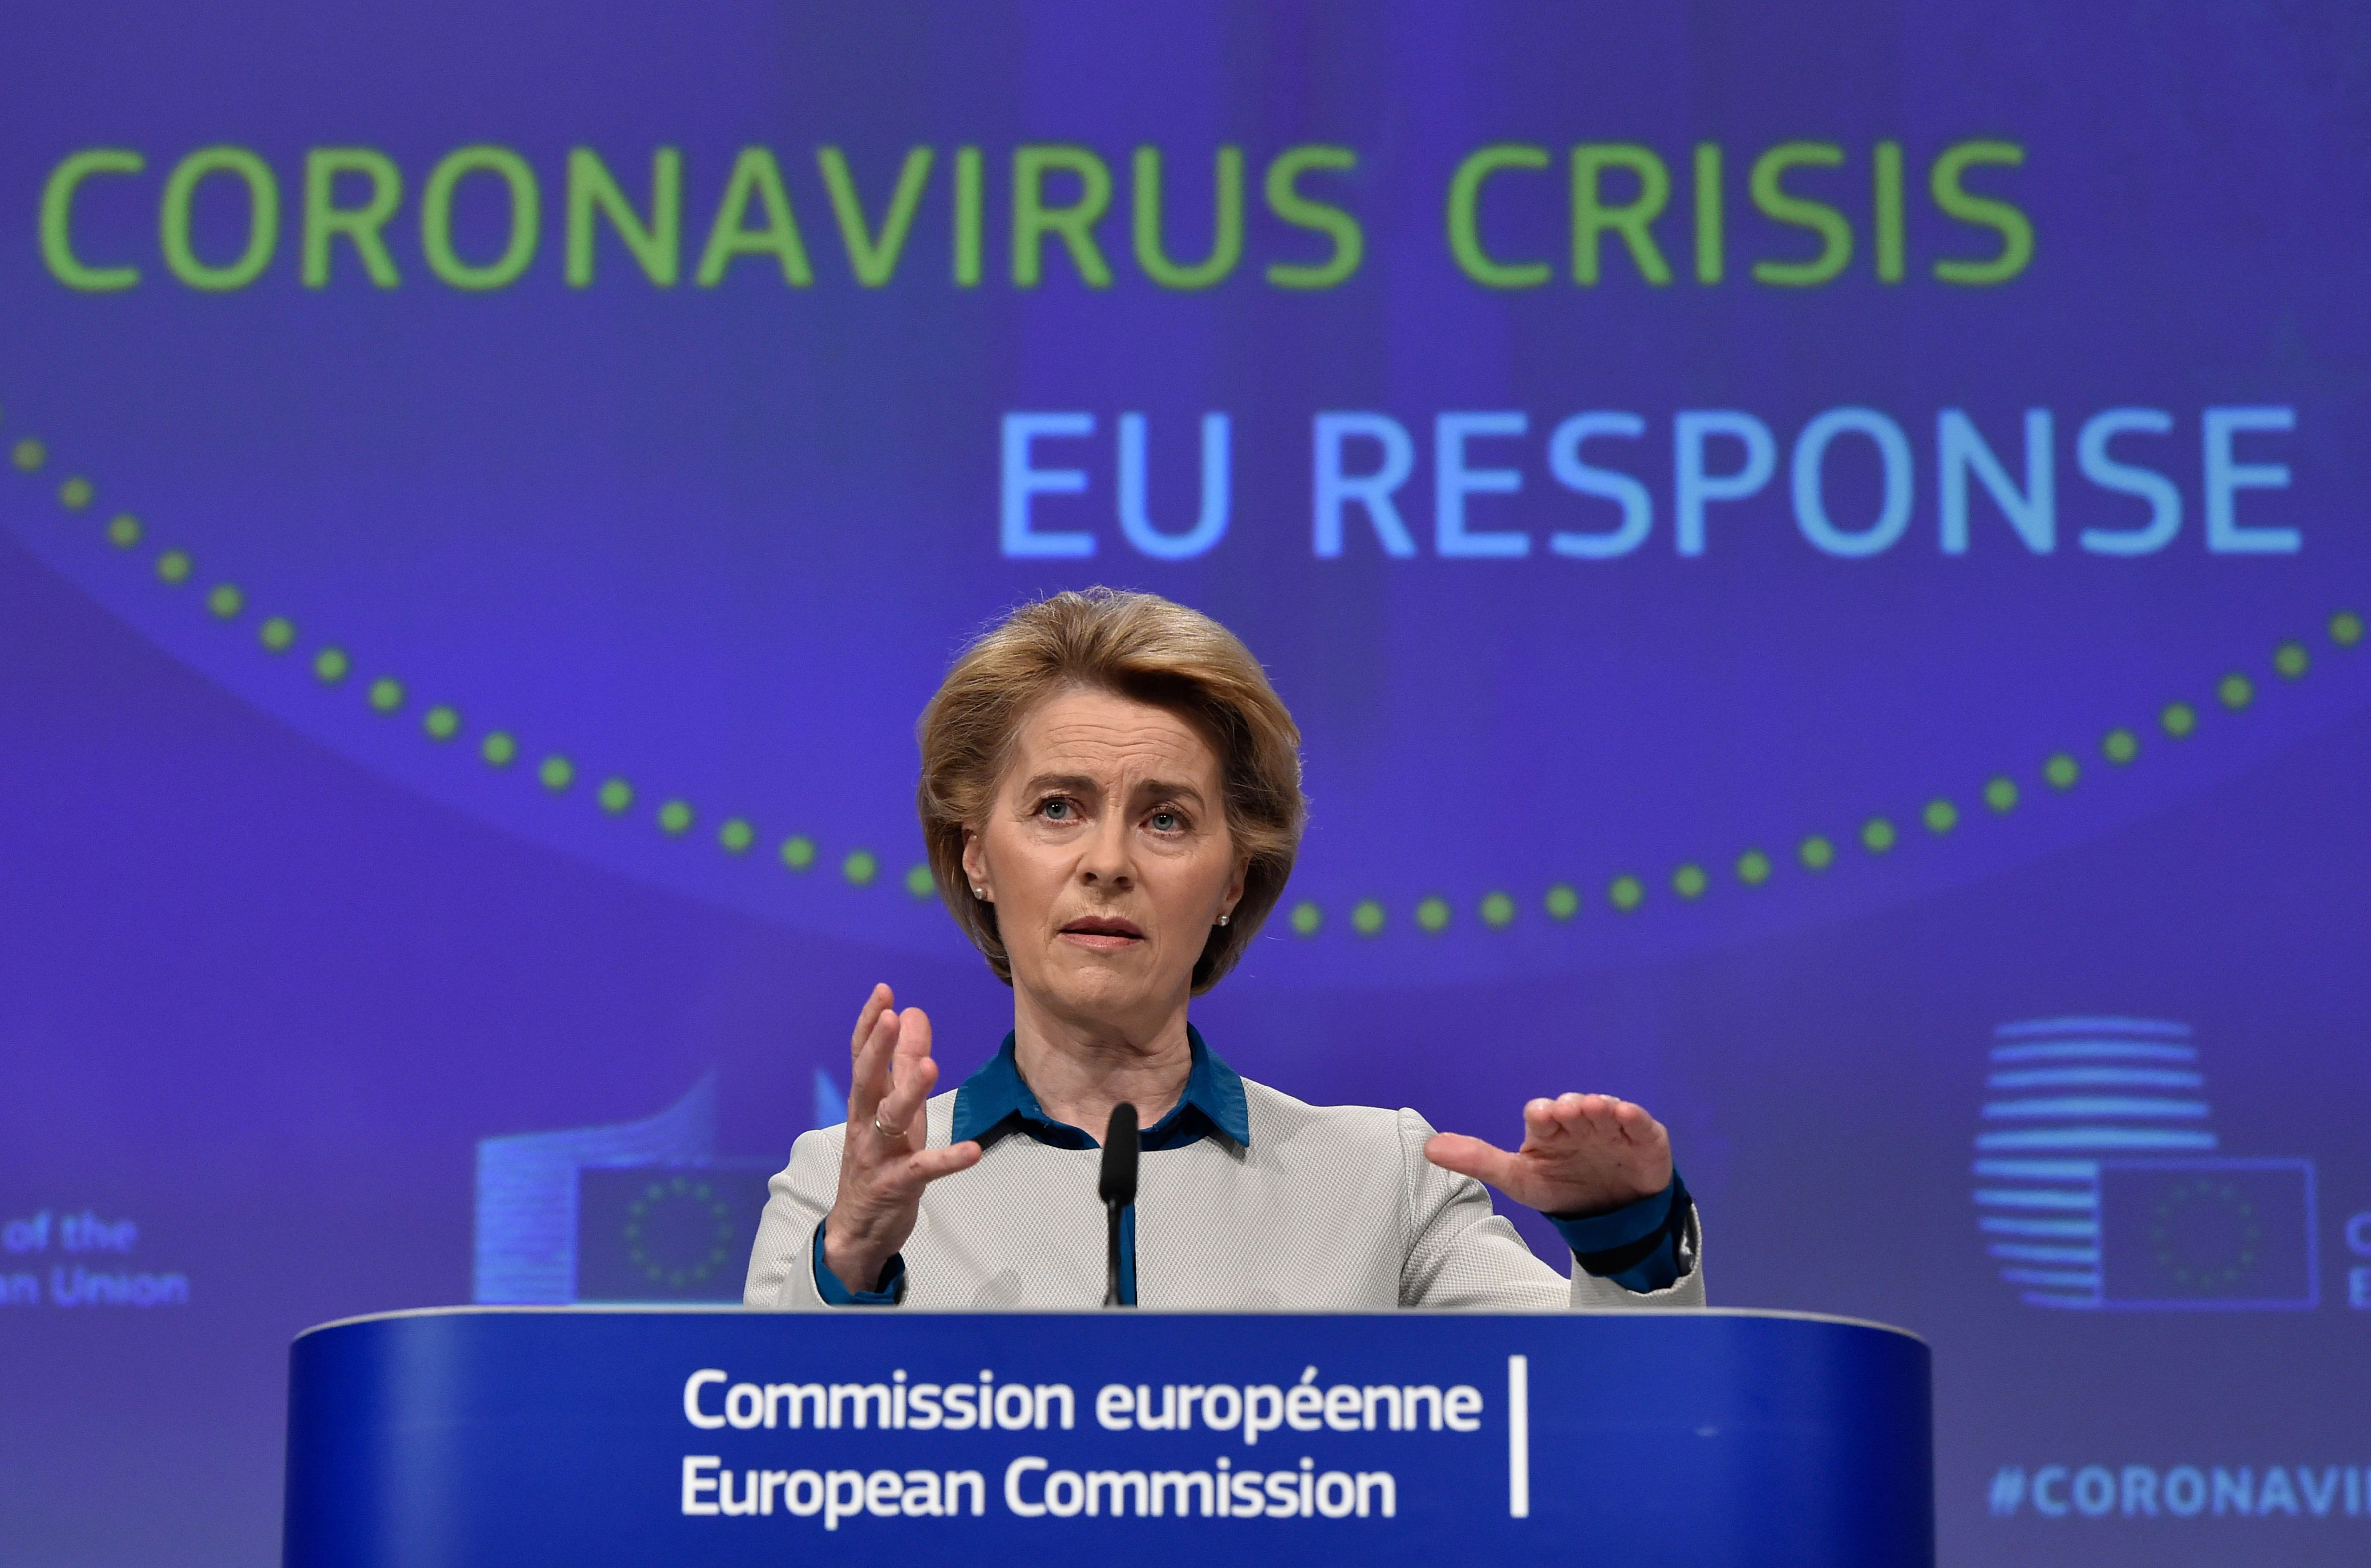 EU Commission President Ursula von der Leyen holds a press conference on the EU's response to the Covid-19 pandemic in Brussels, Belgium, on April 15.